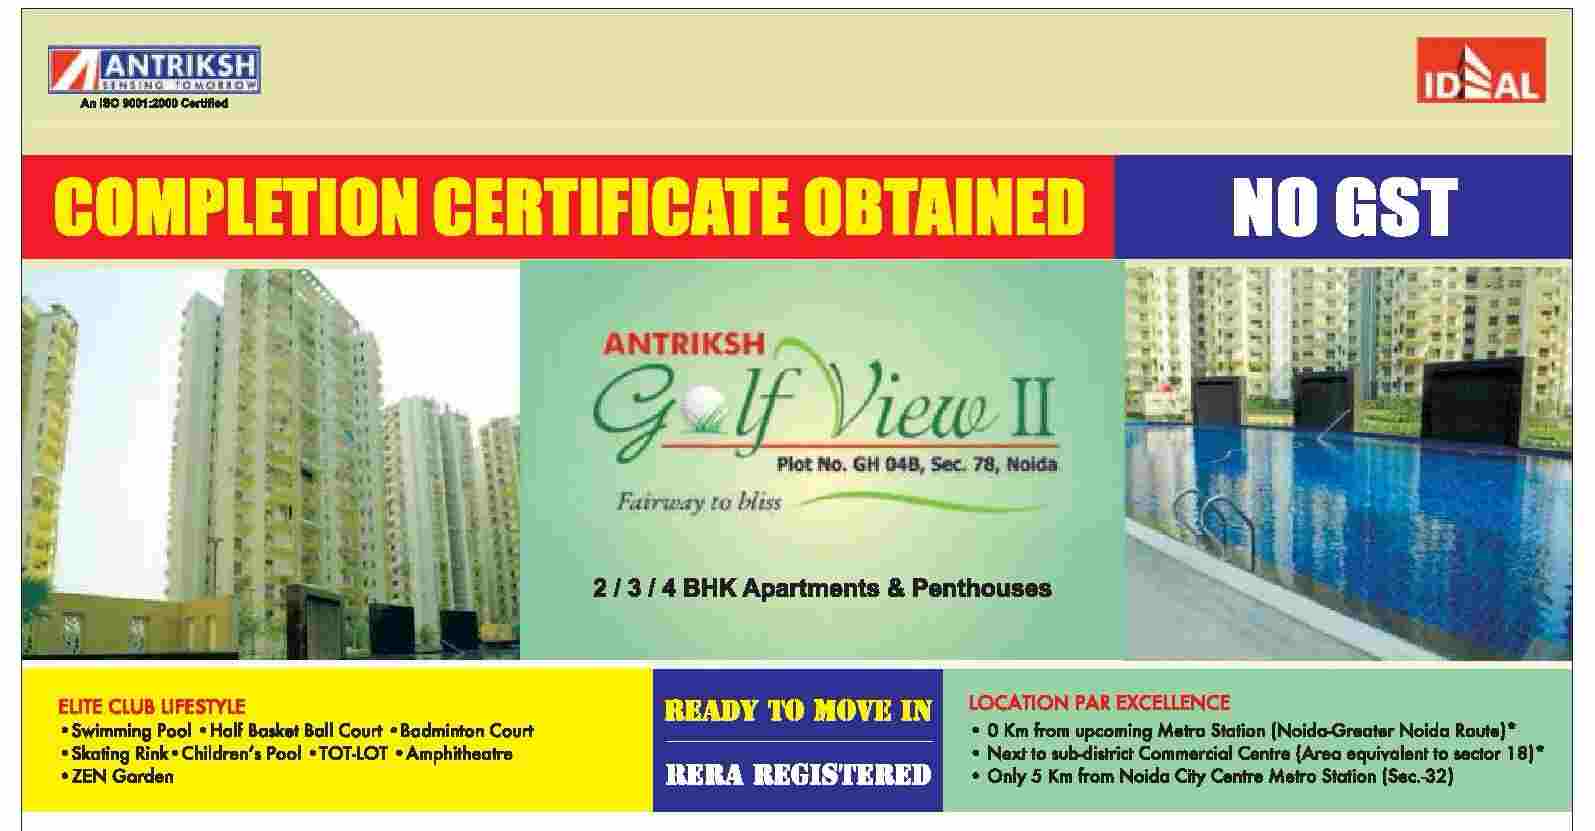 Live in ready to move homes at Antriksh Golf View II in Noida